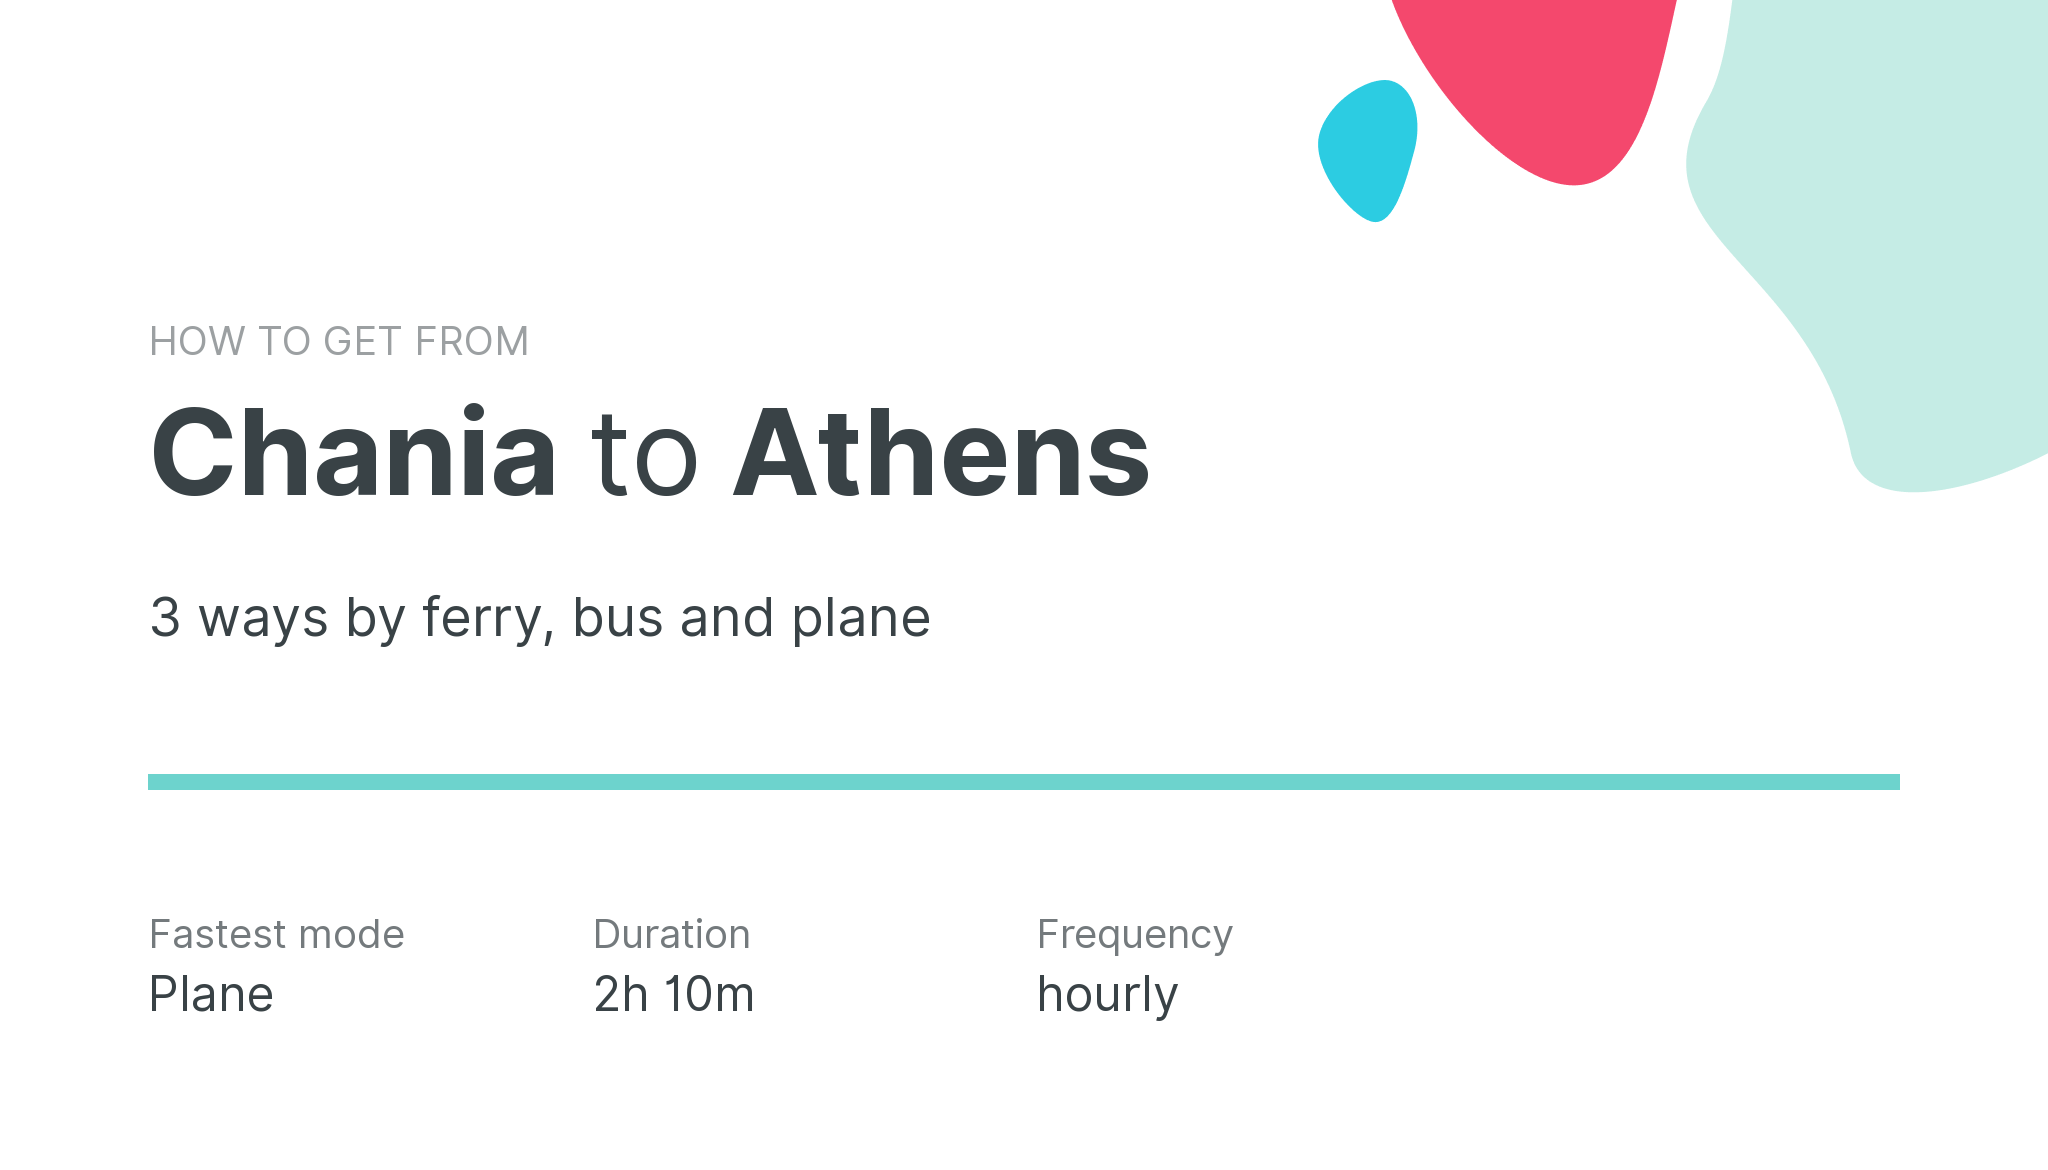 How do I get from Chania to Athens